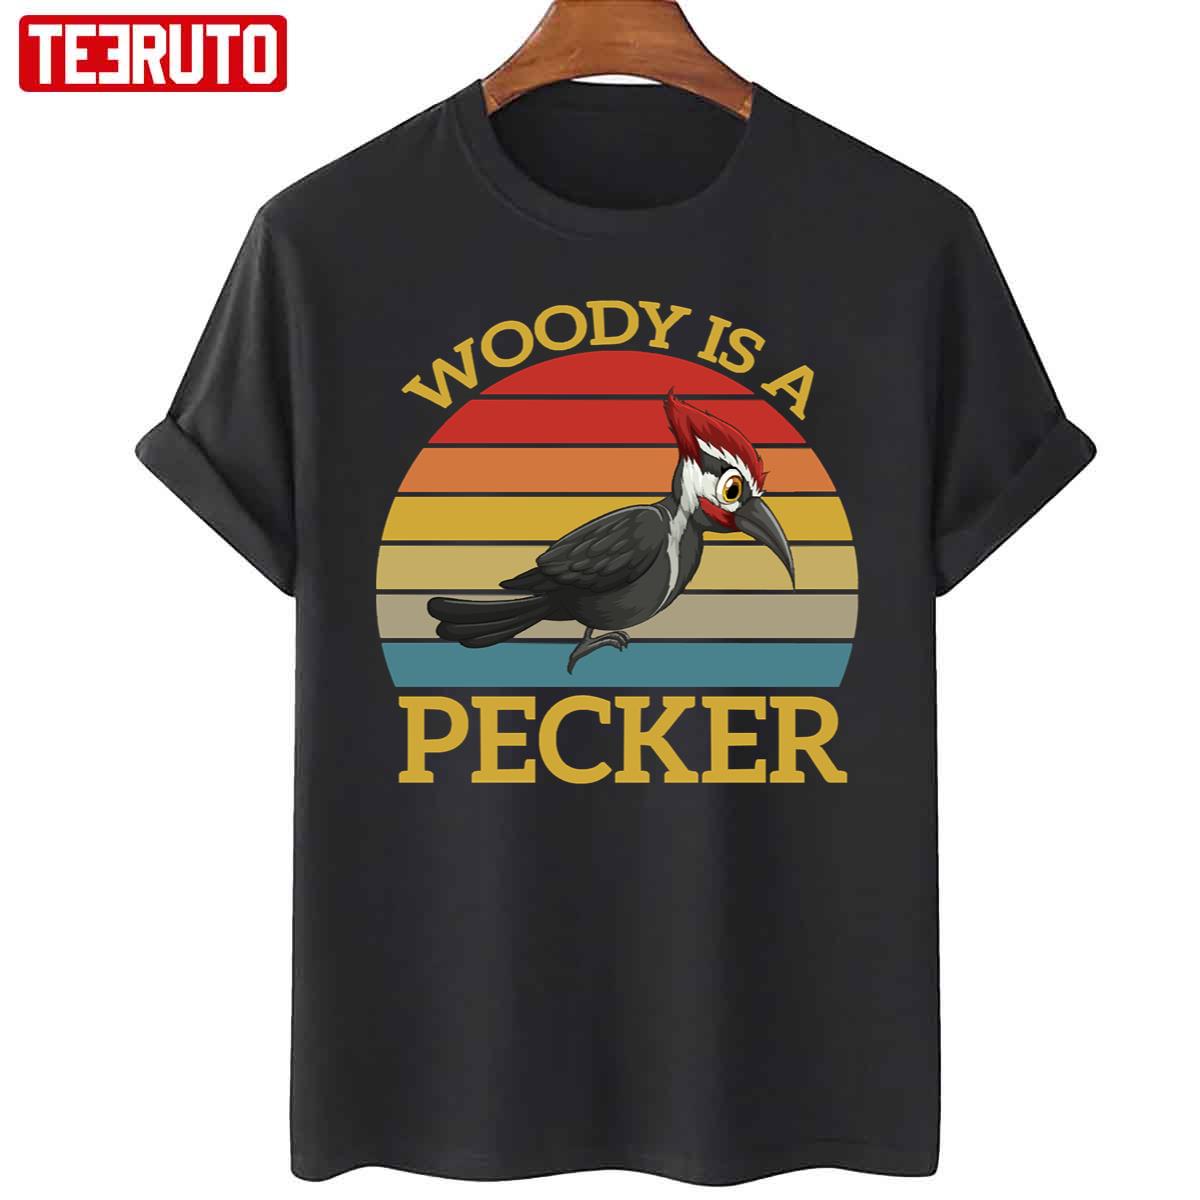 Woody Is A Pecker Funny Vintage Unisex T-Shirt